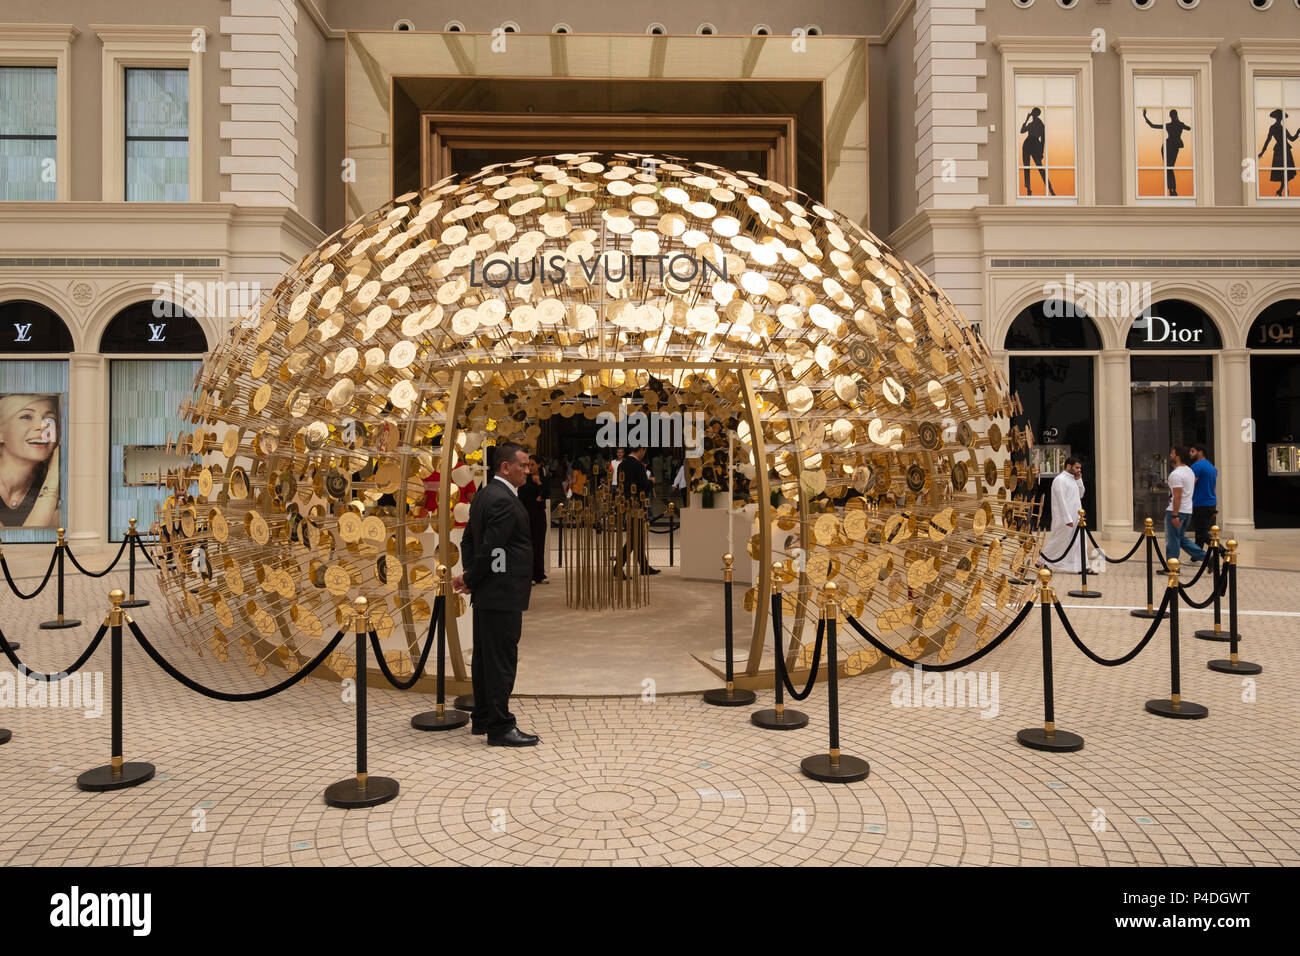 Louis Vuitton ornate display at The Avenues shopping mall in Kuwait City,  Kuwait Stock Photo - Alamy